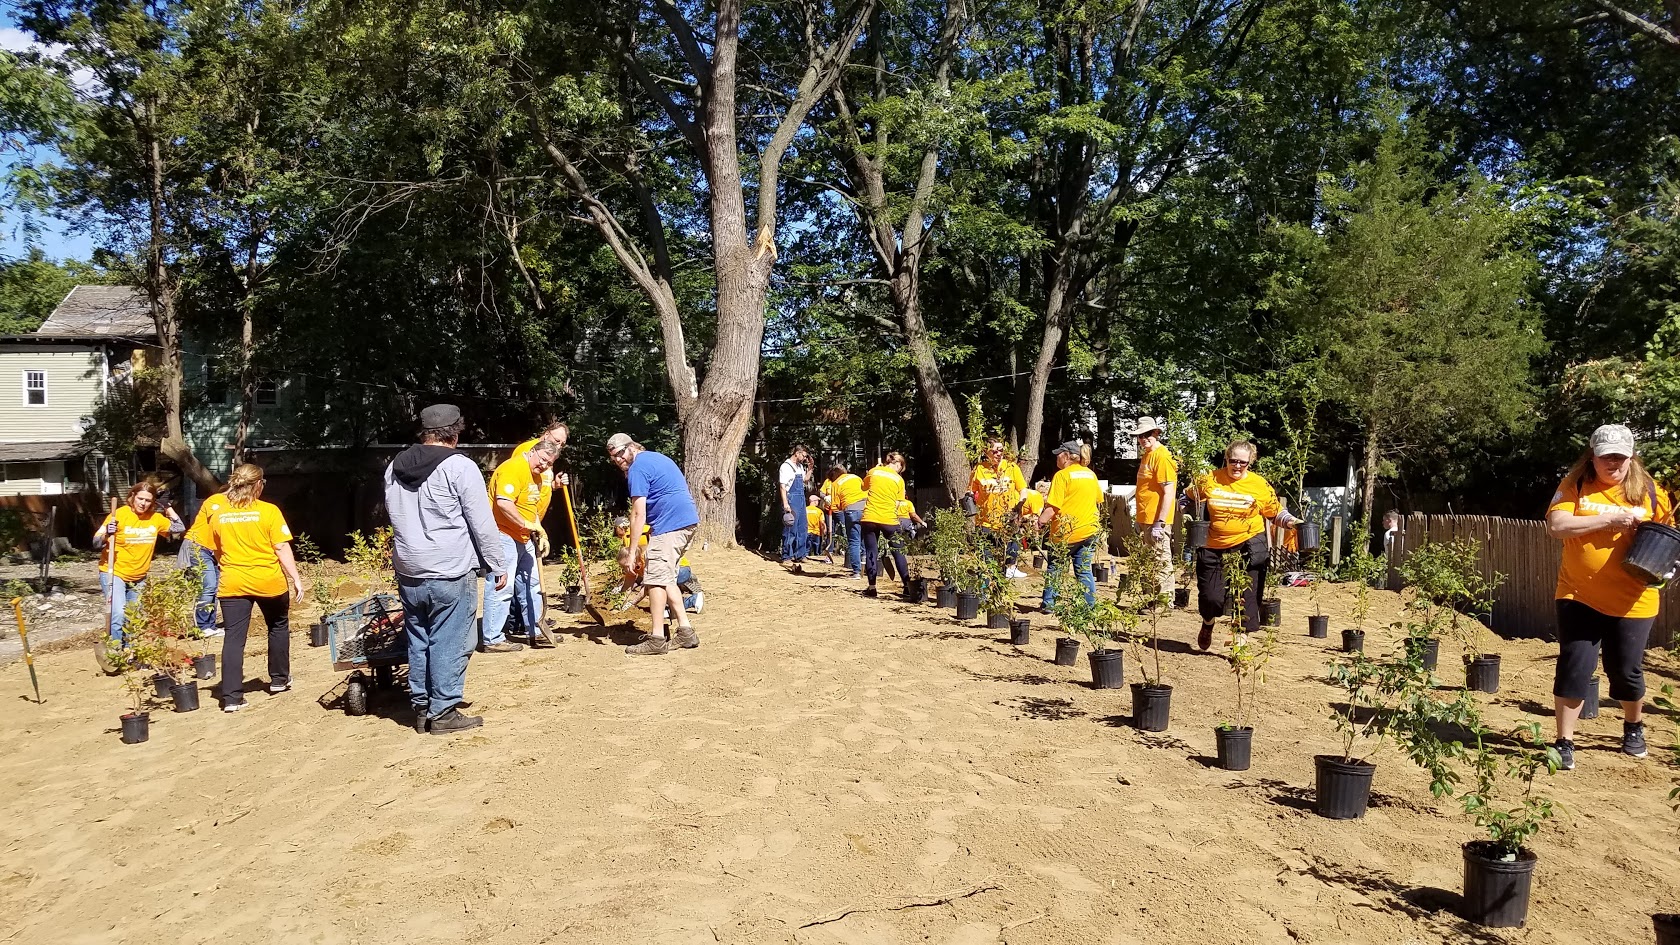 Lions, Anthem volunteers, and other community members work together to plant 200 blueberry bushes.